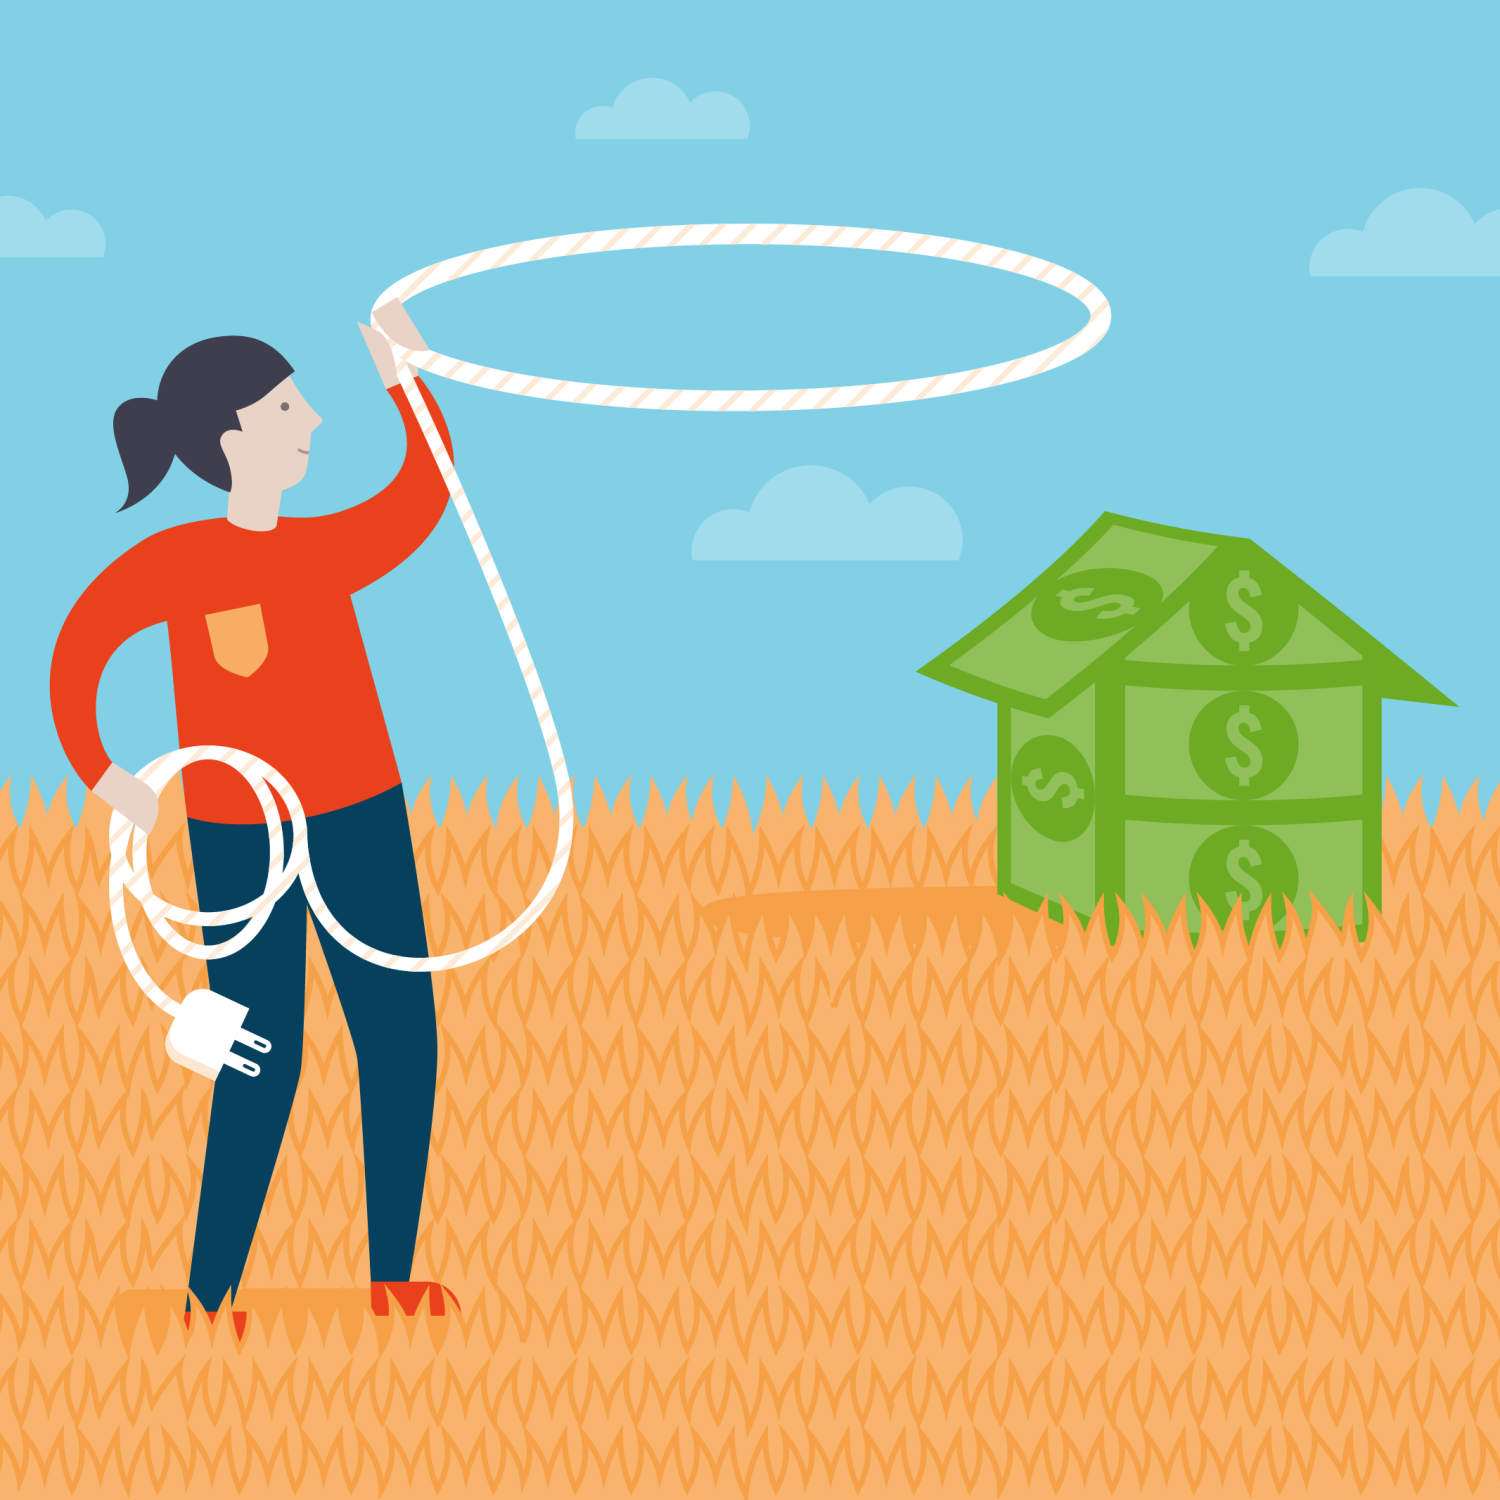 An illustration of a woman with a cord and a money house